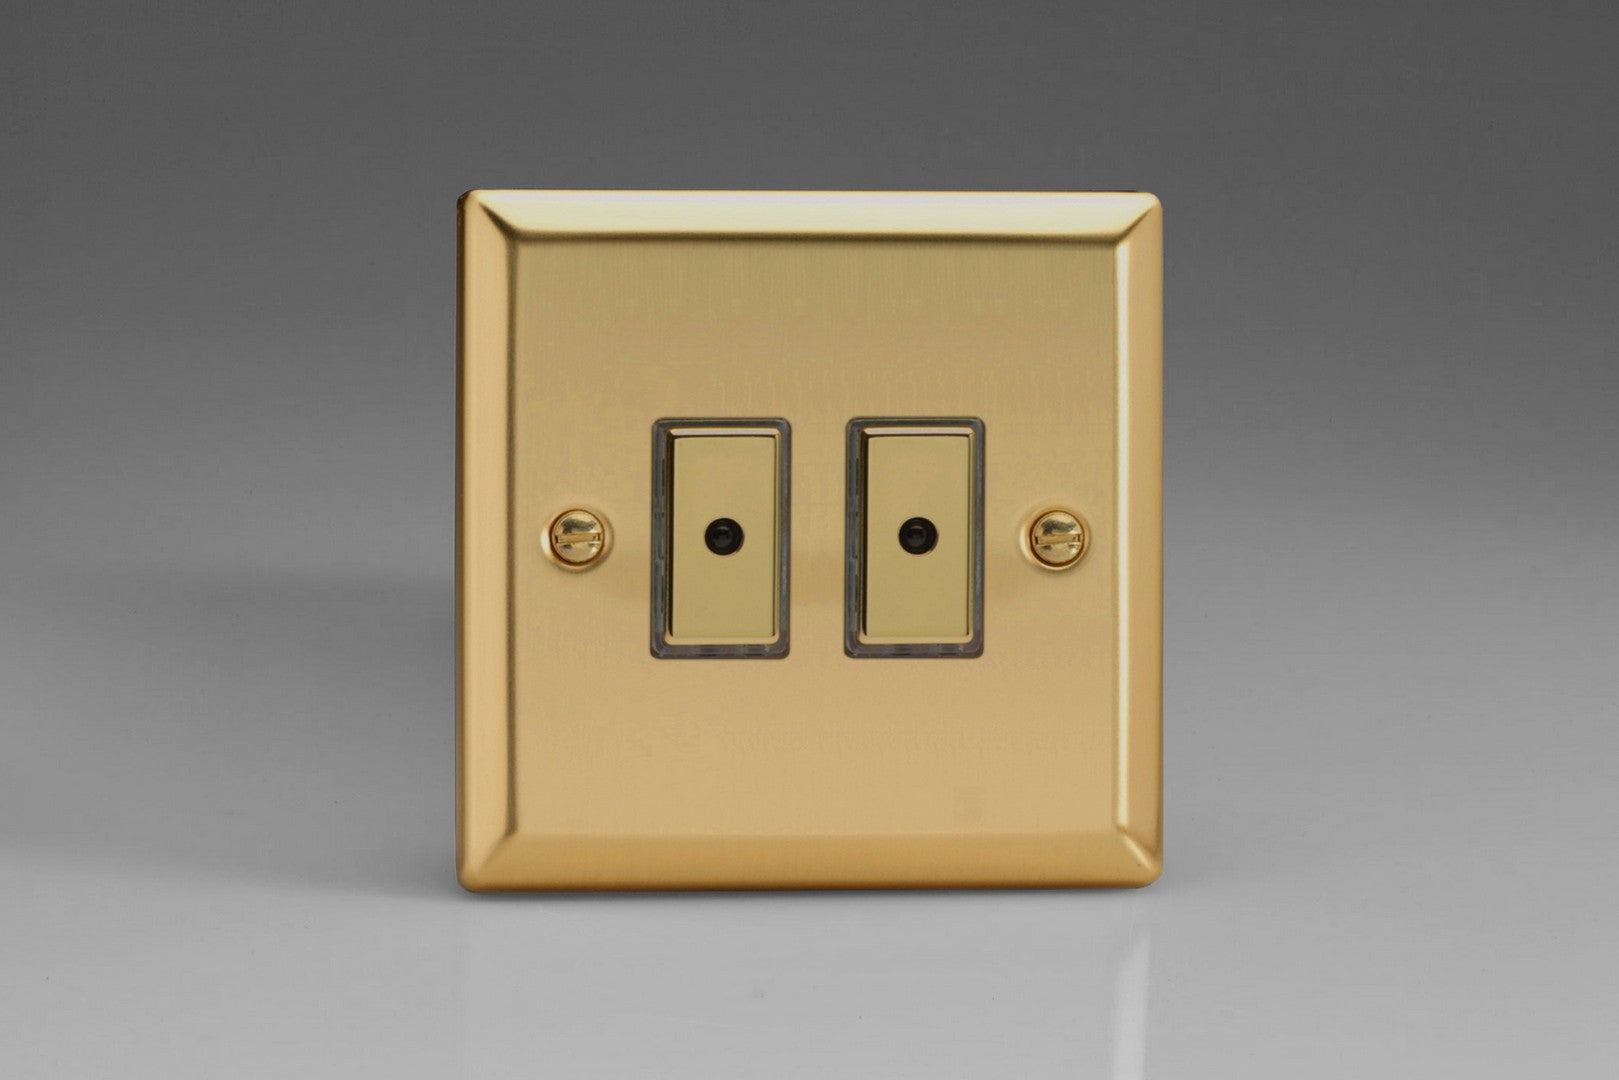 Varilight JVE102 Classic Victorian Brass 2-Gang Multi-Way Remote/Tactile Touch Control Master LED Dimmer 2 x 0-100W (1-10 LEDs)